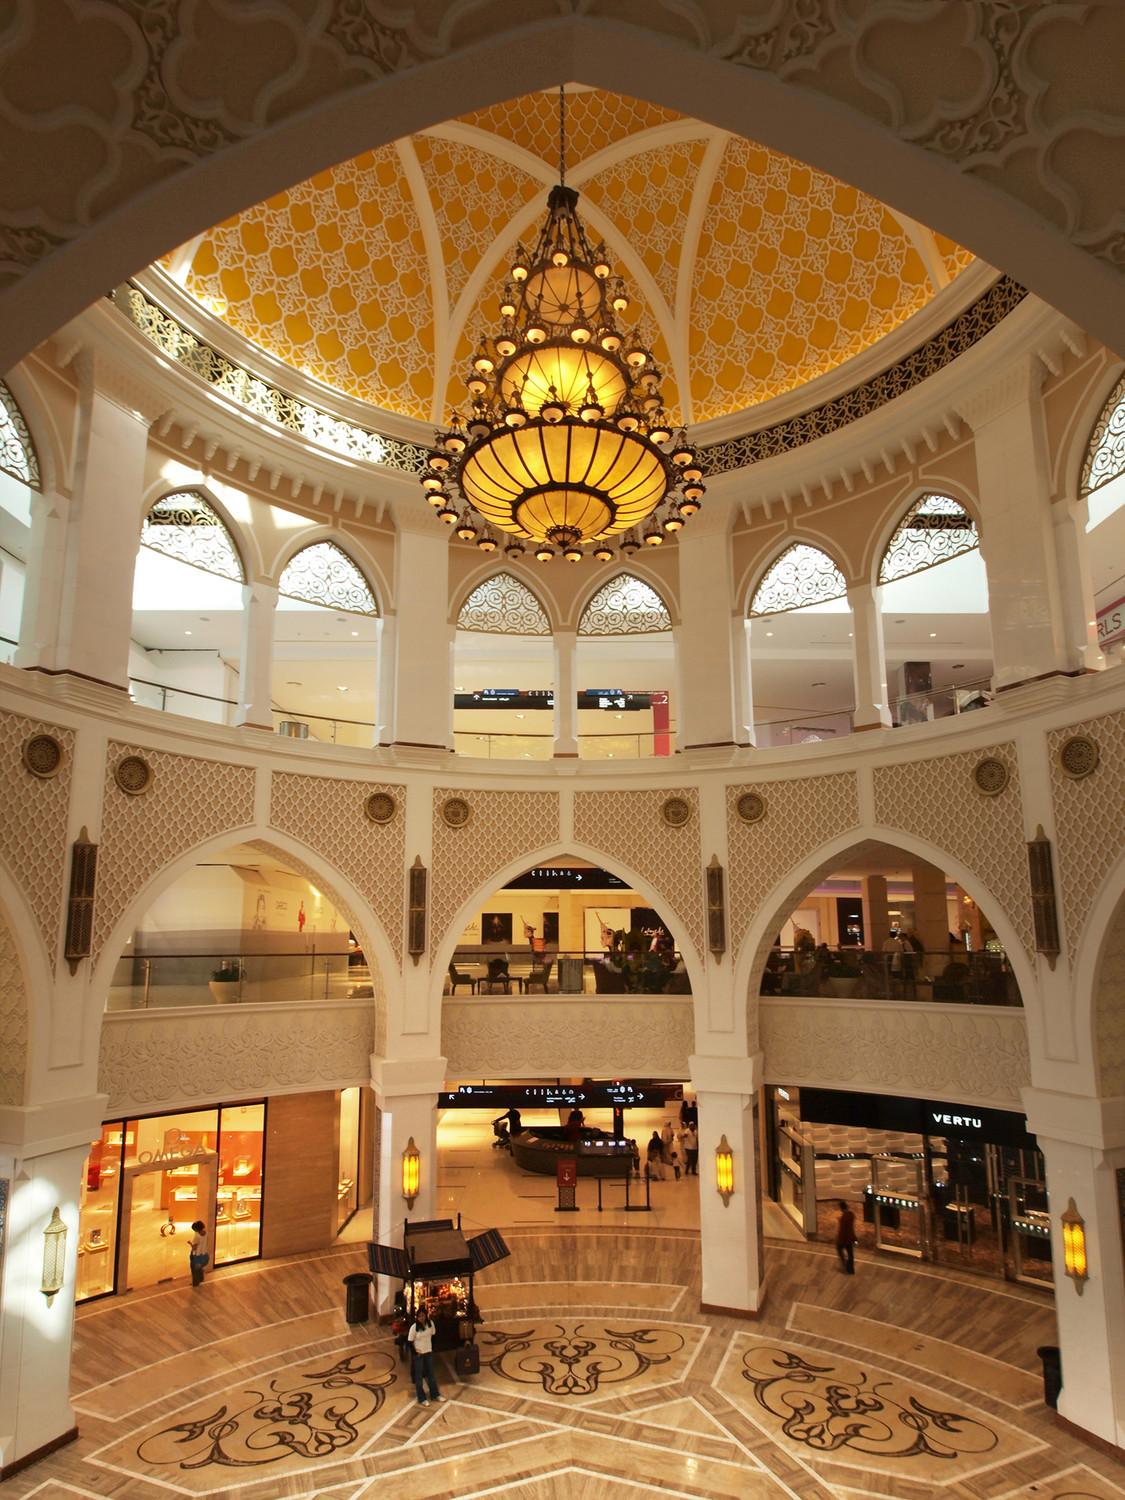 The mall features the largest covered souk in the world with intricate surfacing and massive atrium spaces.